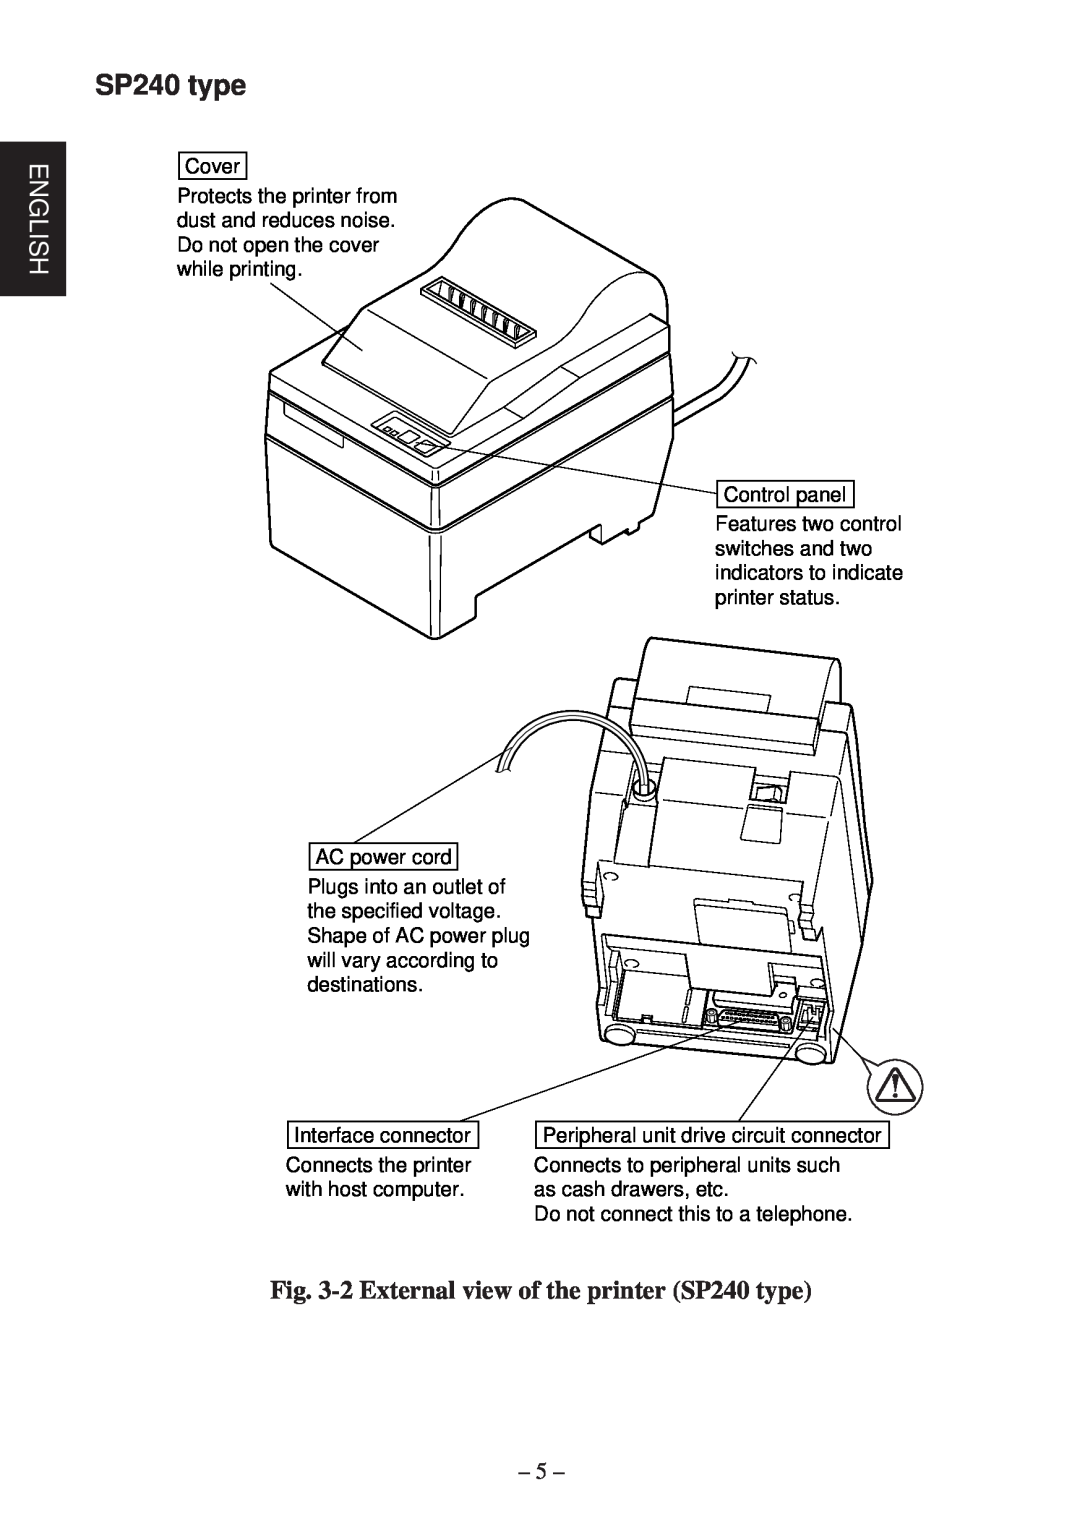 Star Micronics SP200F user manual English, 2 External view of the printer SP240 type 